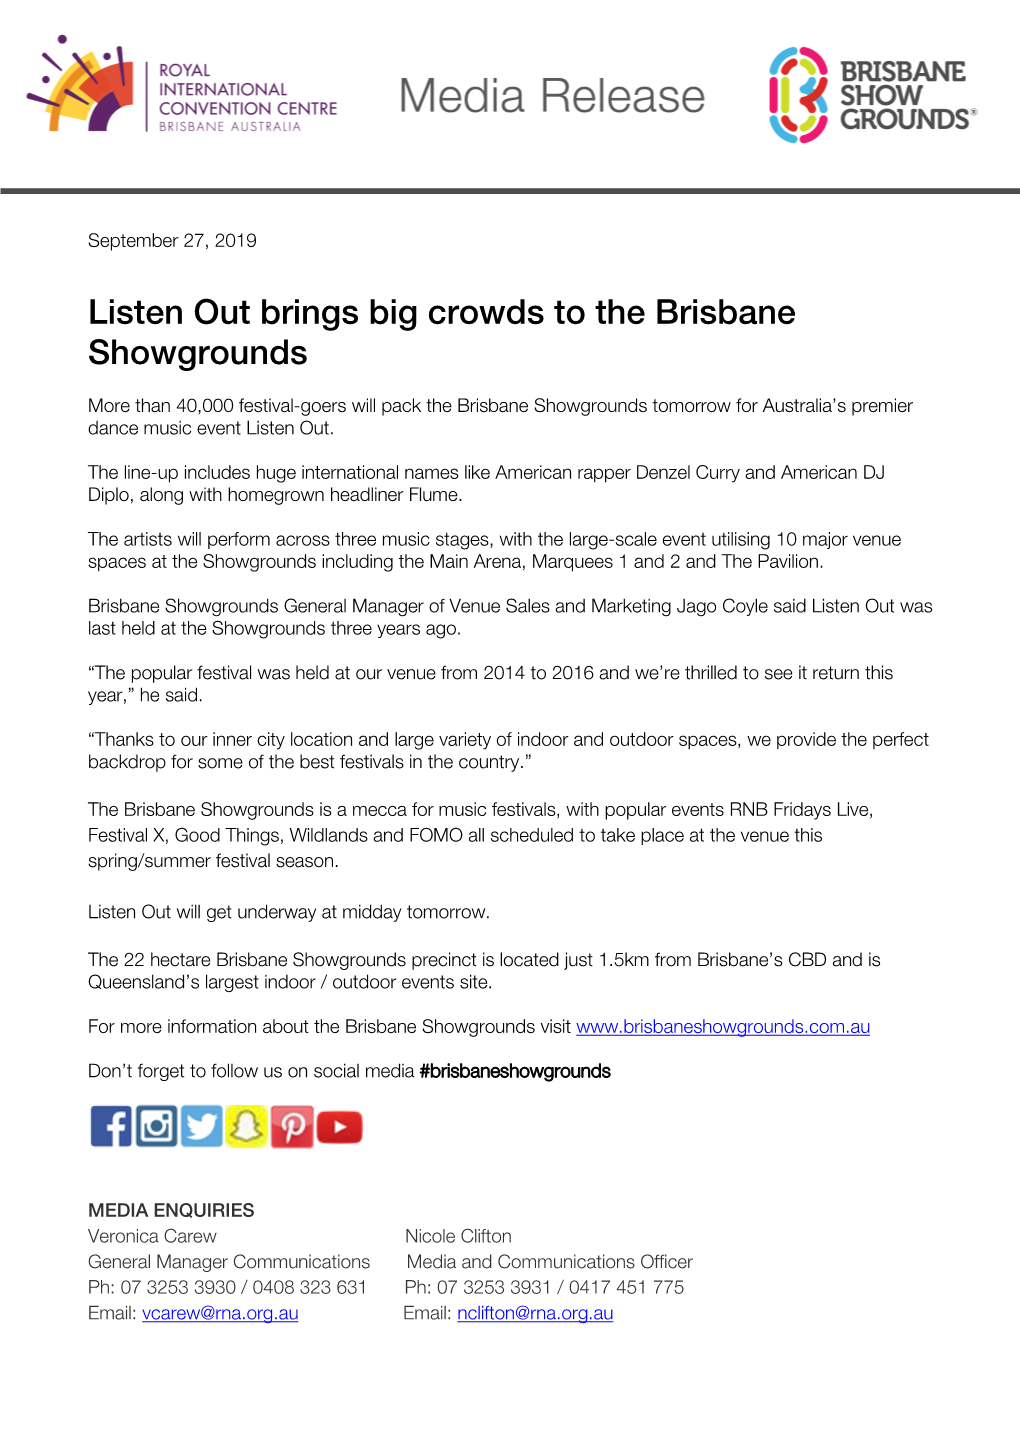 Listen out Brings Big Crowds to the Brisbane Showgrounds